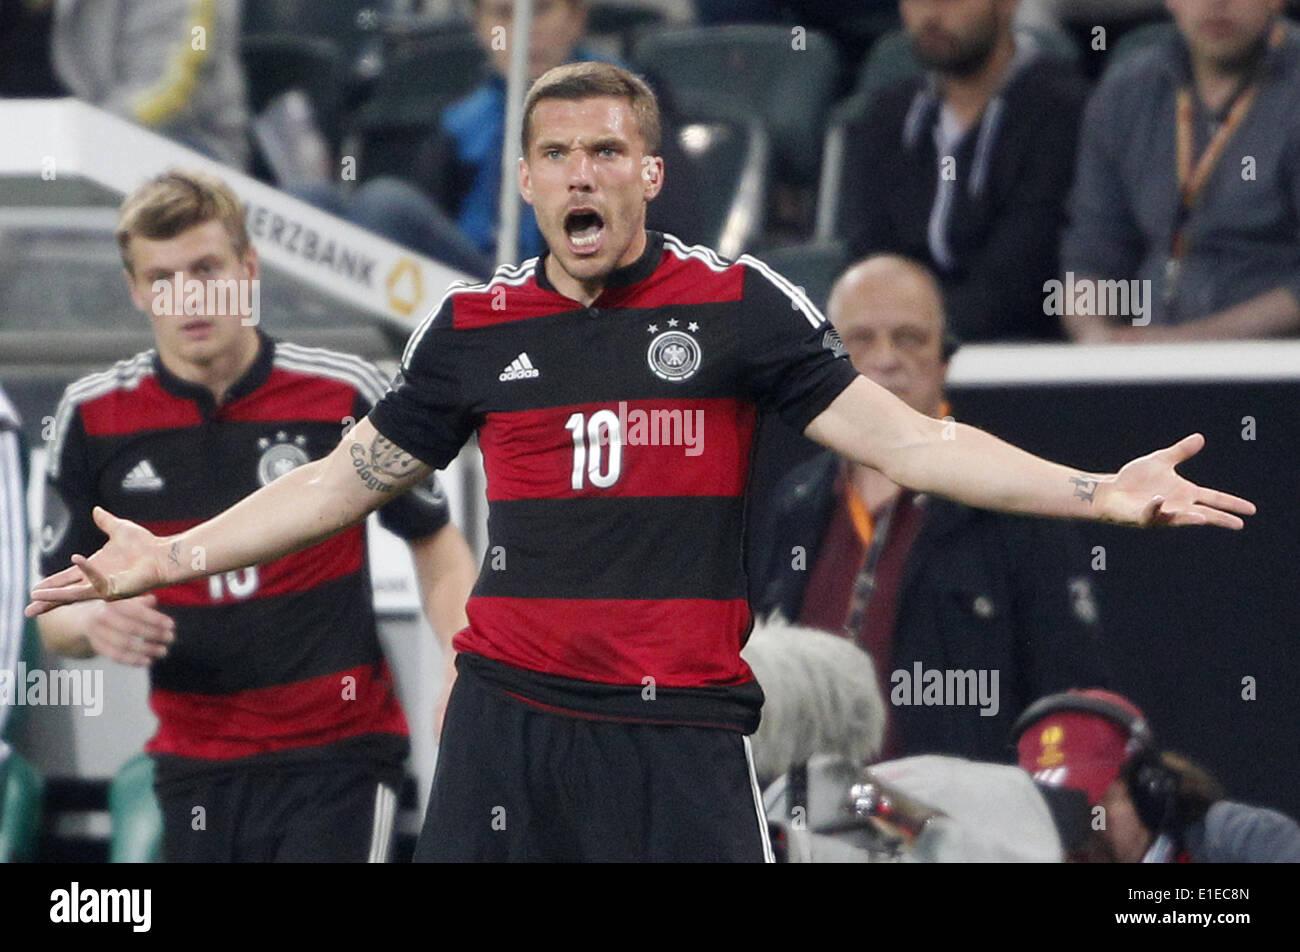 Moenchengladbach, Germany. 01st June, 2014. Germany's Lukas Podolski reacts during the friendly soccer match between Germany and Cameroon at the Borussia Park stadium in Moenchengladbach, Germany, 01 June 2014. Photo: Roland Weihrauch/dpa/Alamy Live News Stock Photo